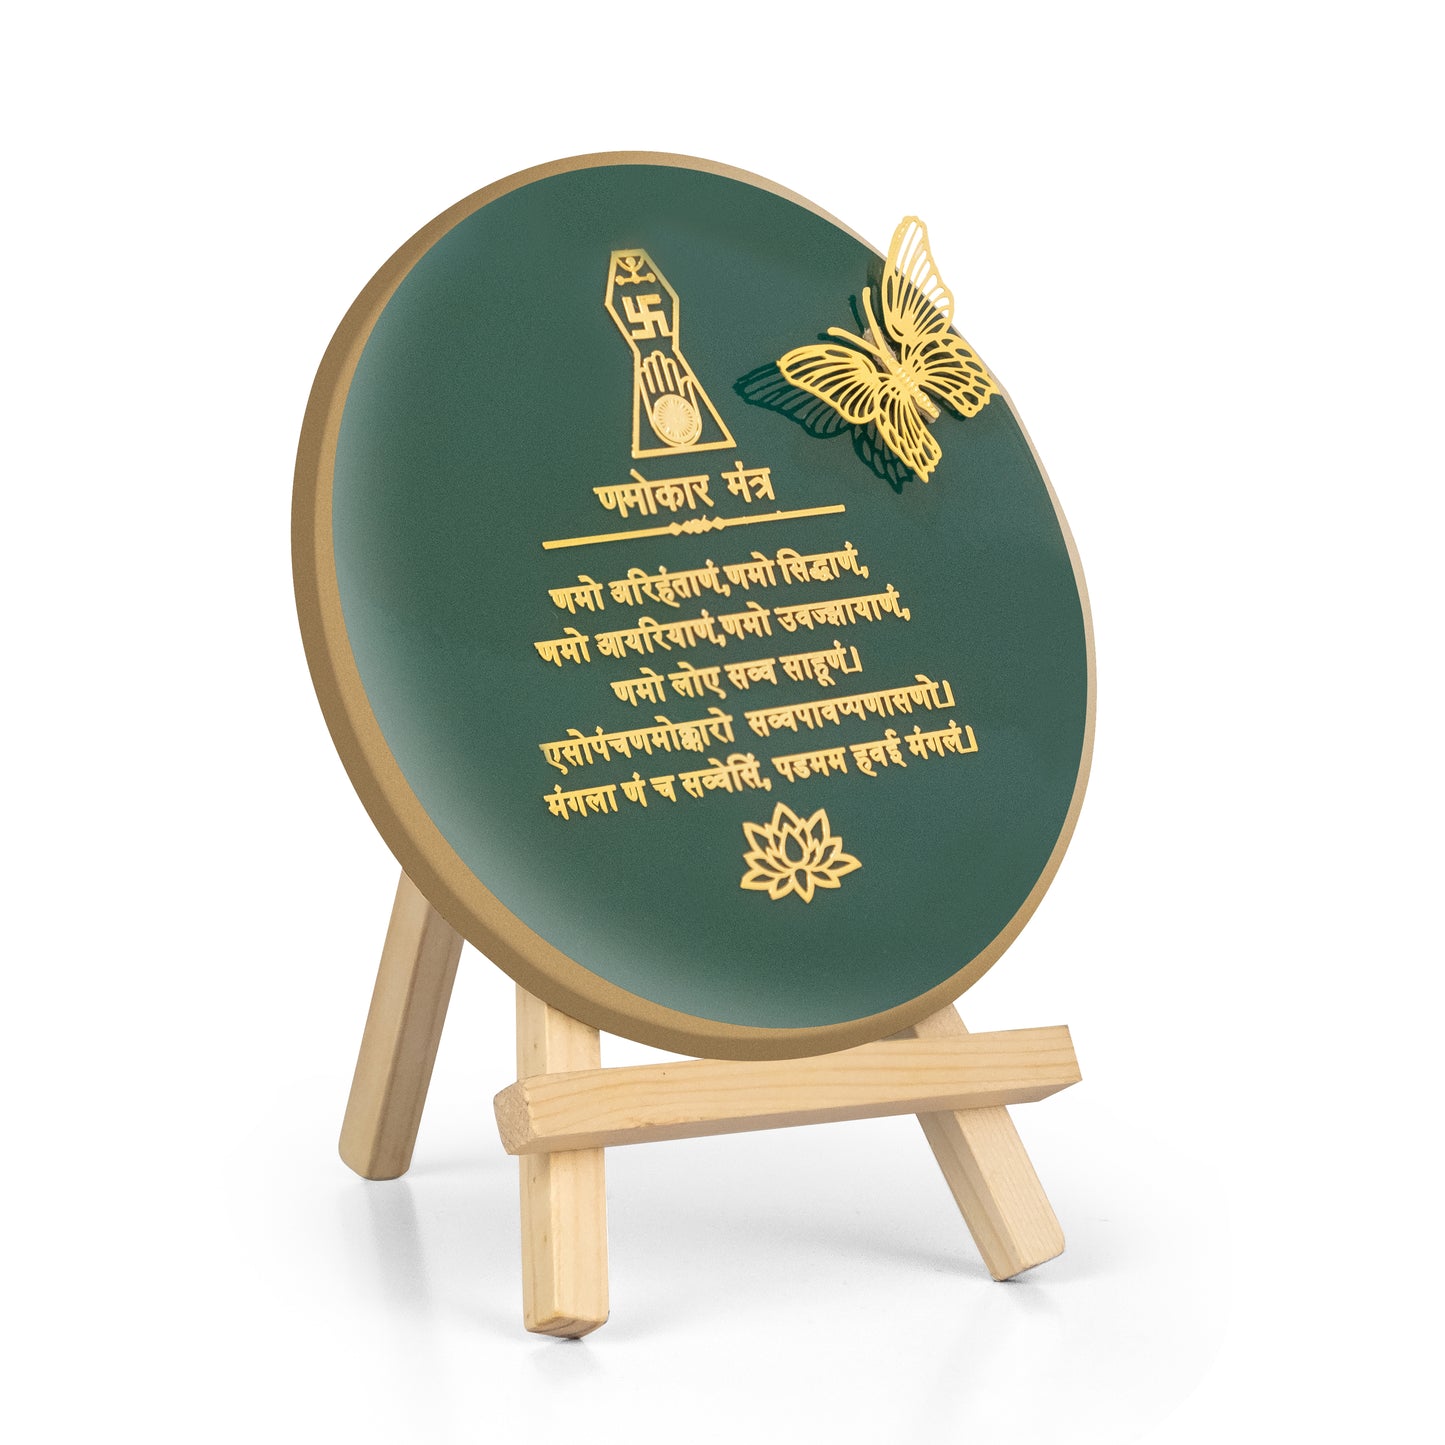 Namokar Mantra Resin Art gold cutwork with A Type Pine Wood Easel Stand - Gifting, Decor Art for Home, Office, Yoga Studio